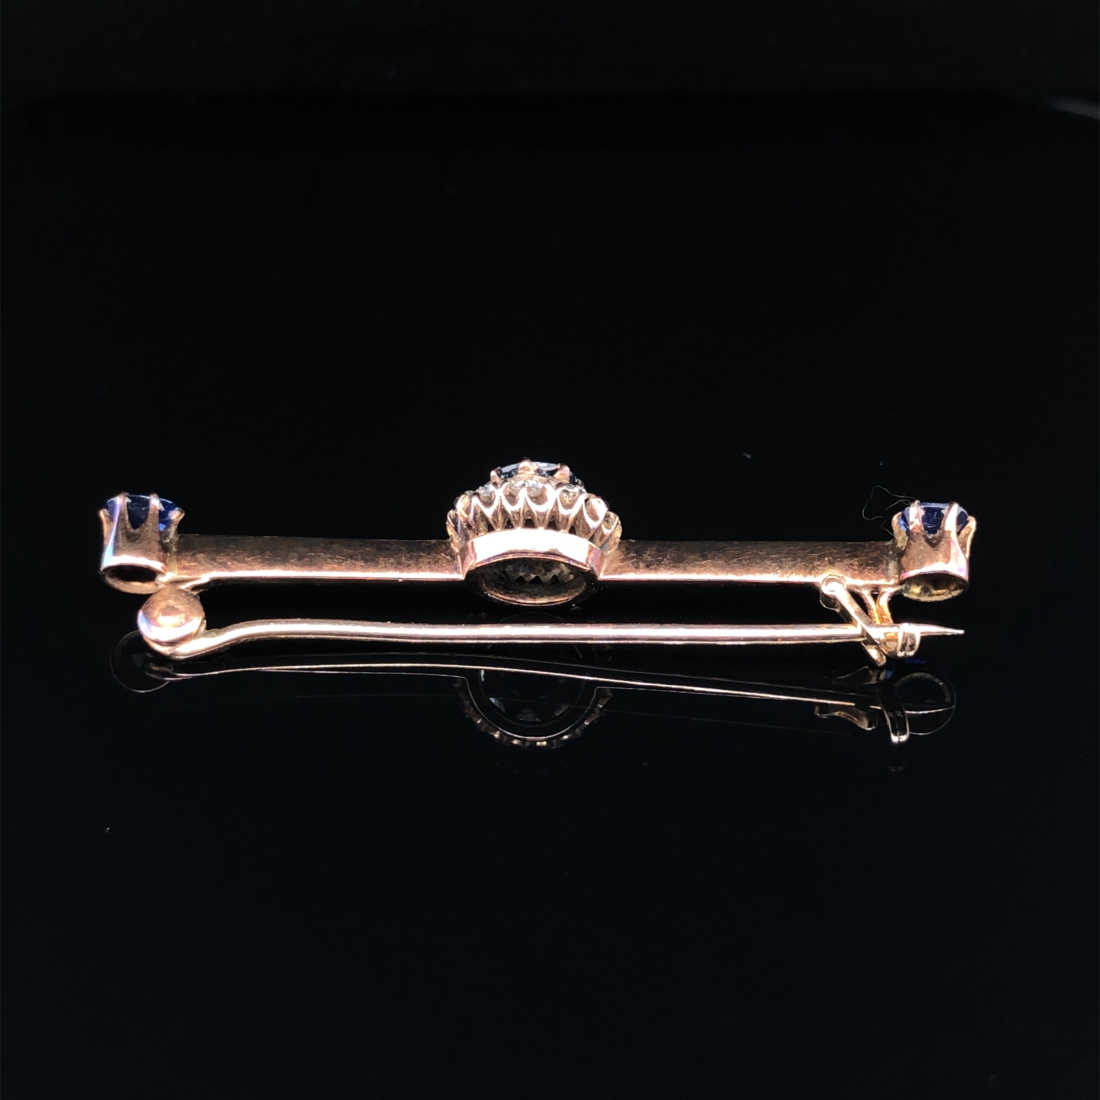 AN ANTIQUE SAPPHIRE AND DIAMOND BRA BROOCH. UNHALLMARKED, ASSESSED AS 9ct GOLD. LENGTH 4.6cms. - Image 2 of 7